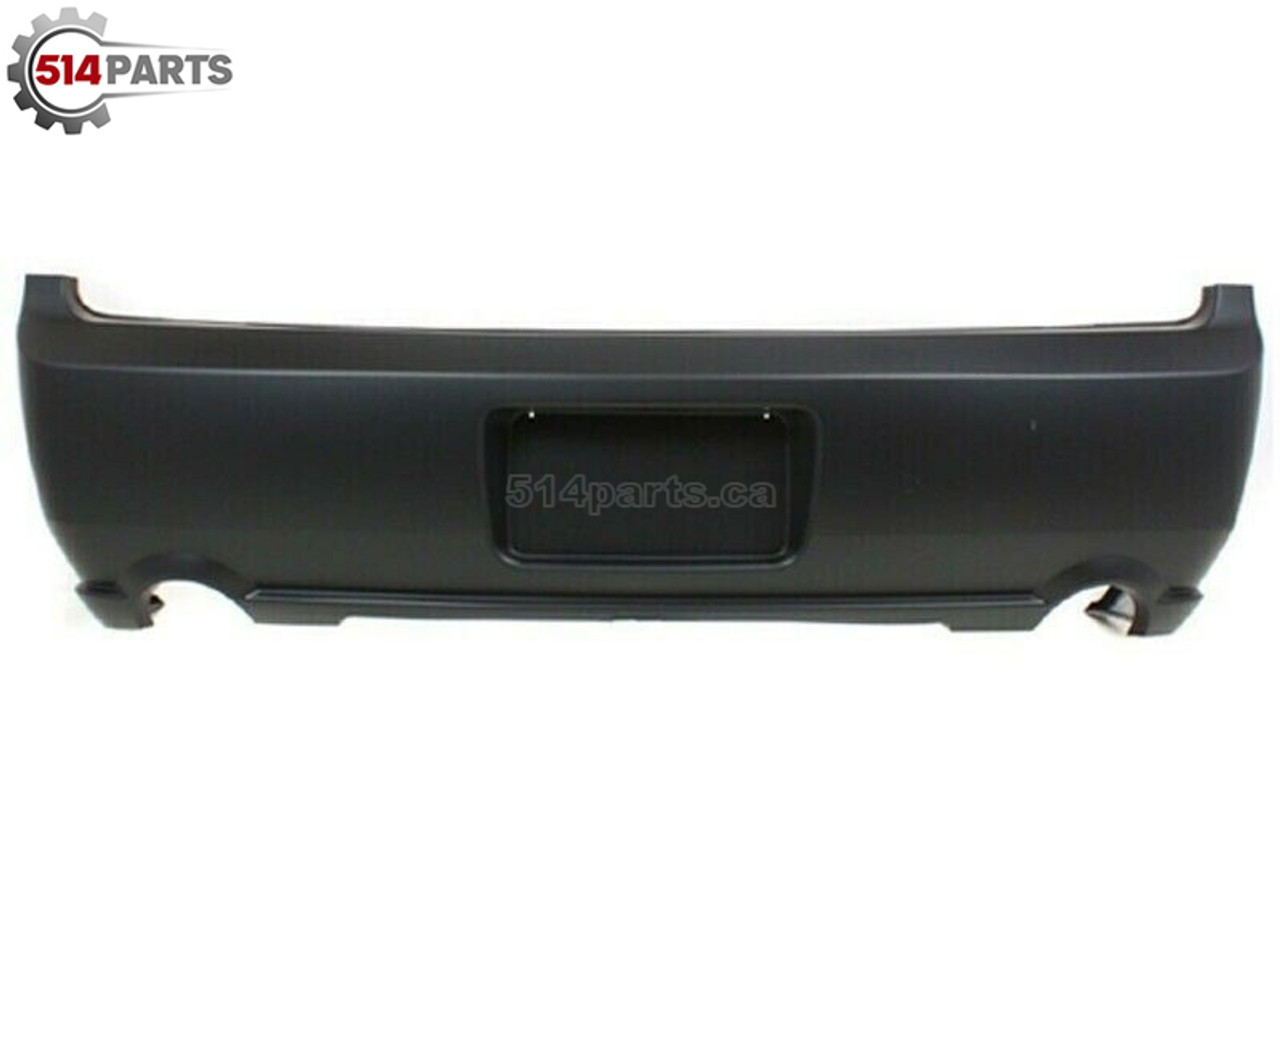 2005 - 2009 FORD MUSTANG GT MODEL REAR BUMPER COVER - PARE-CHOCS ARRIERE